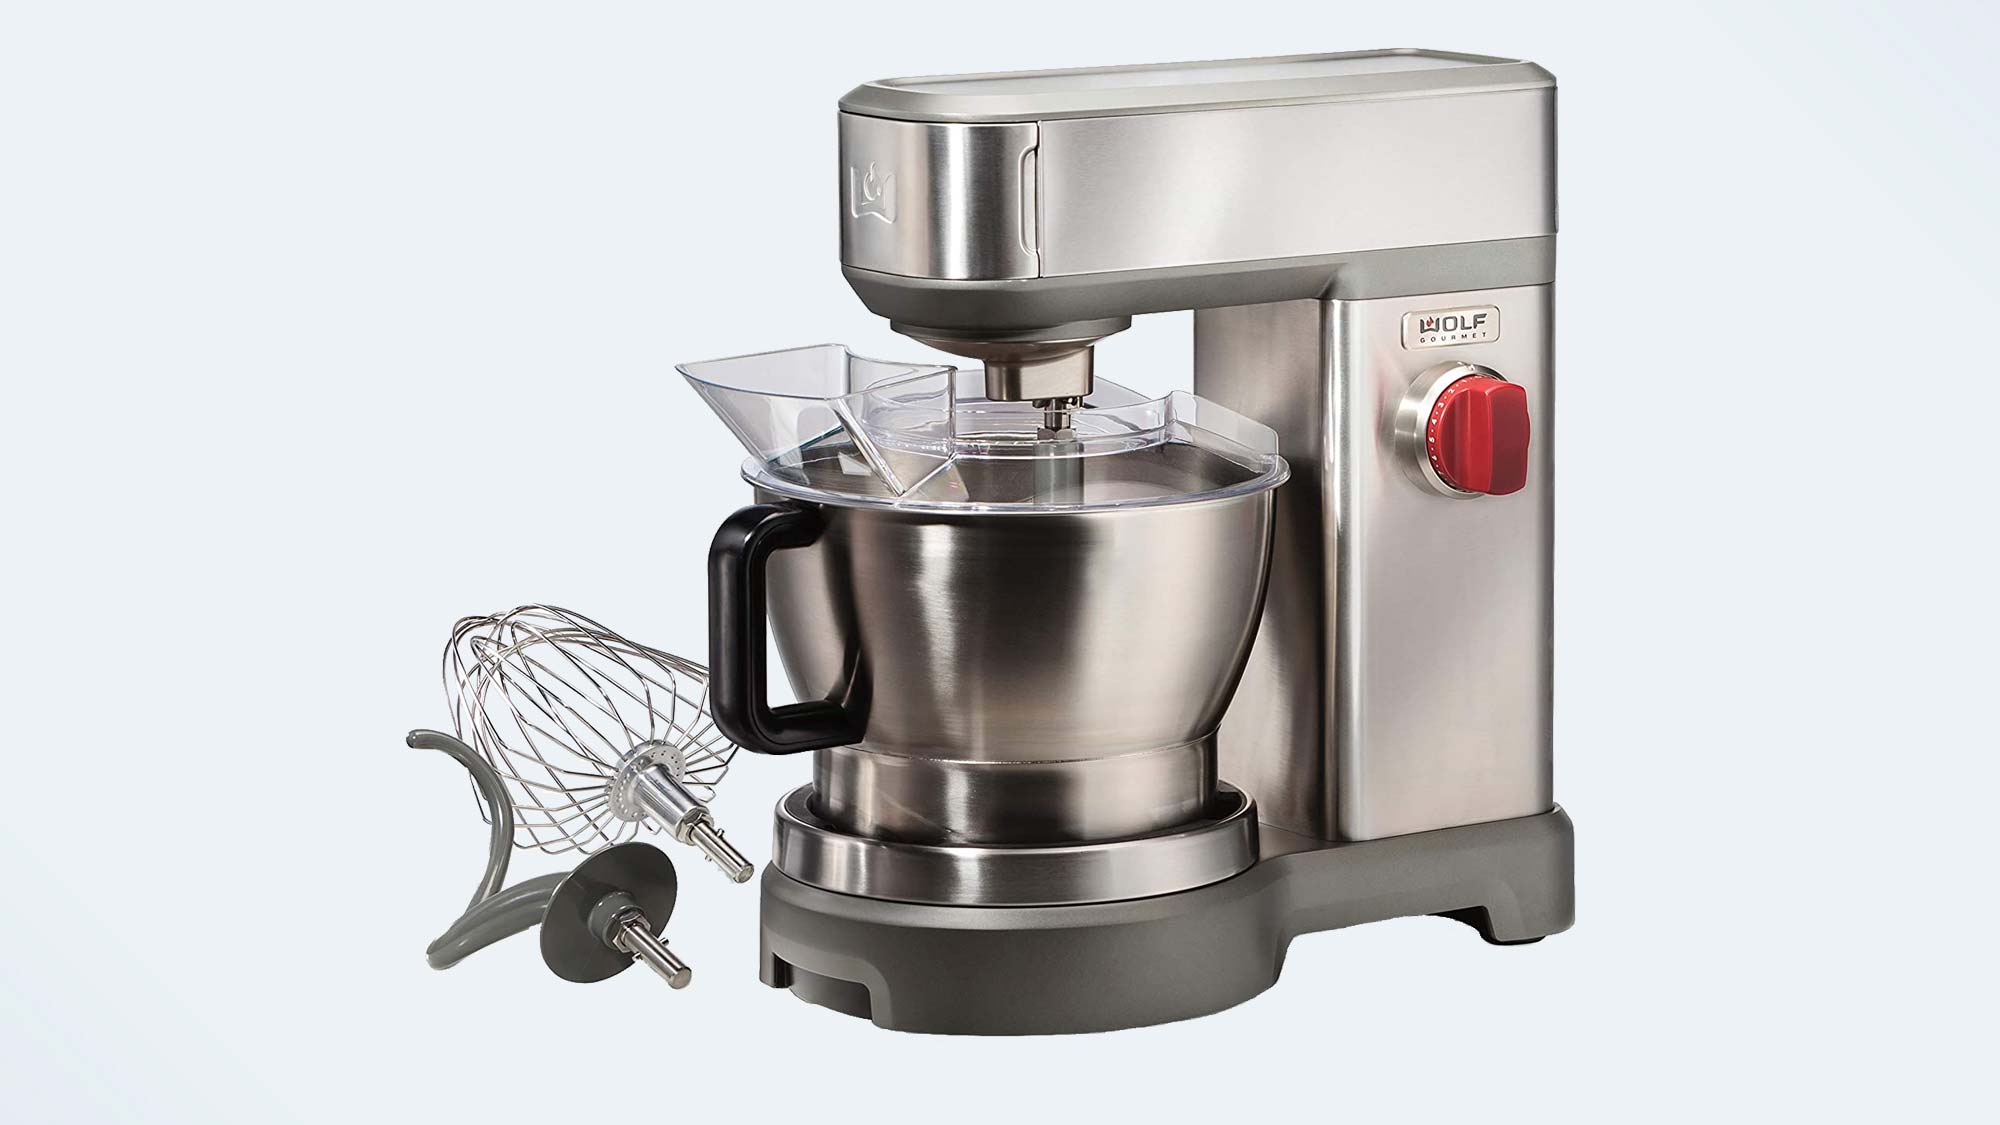 The best stand mixers: Wolf Gourmet Stand Mixer (WGSM100S)